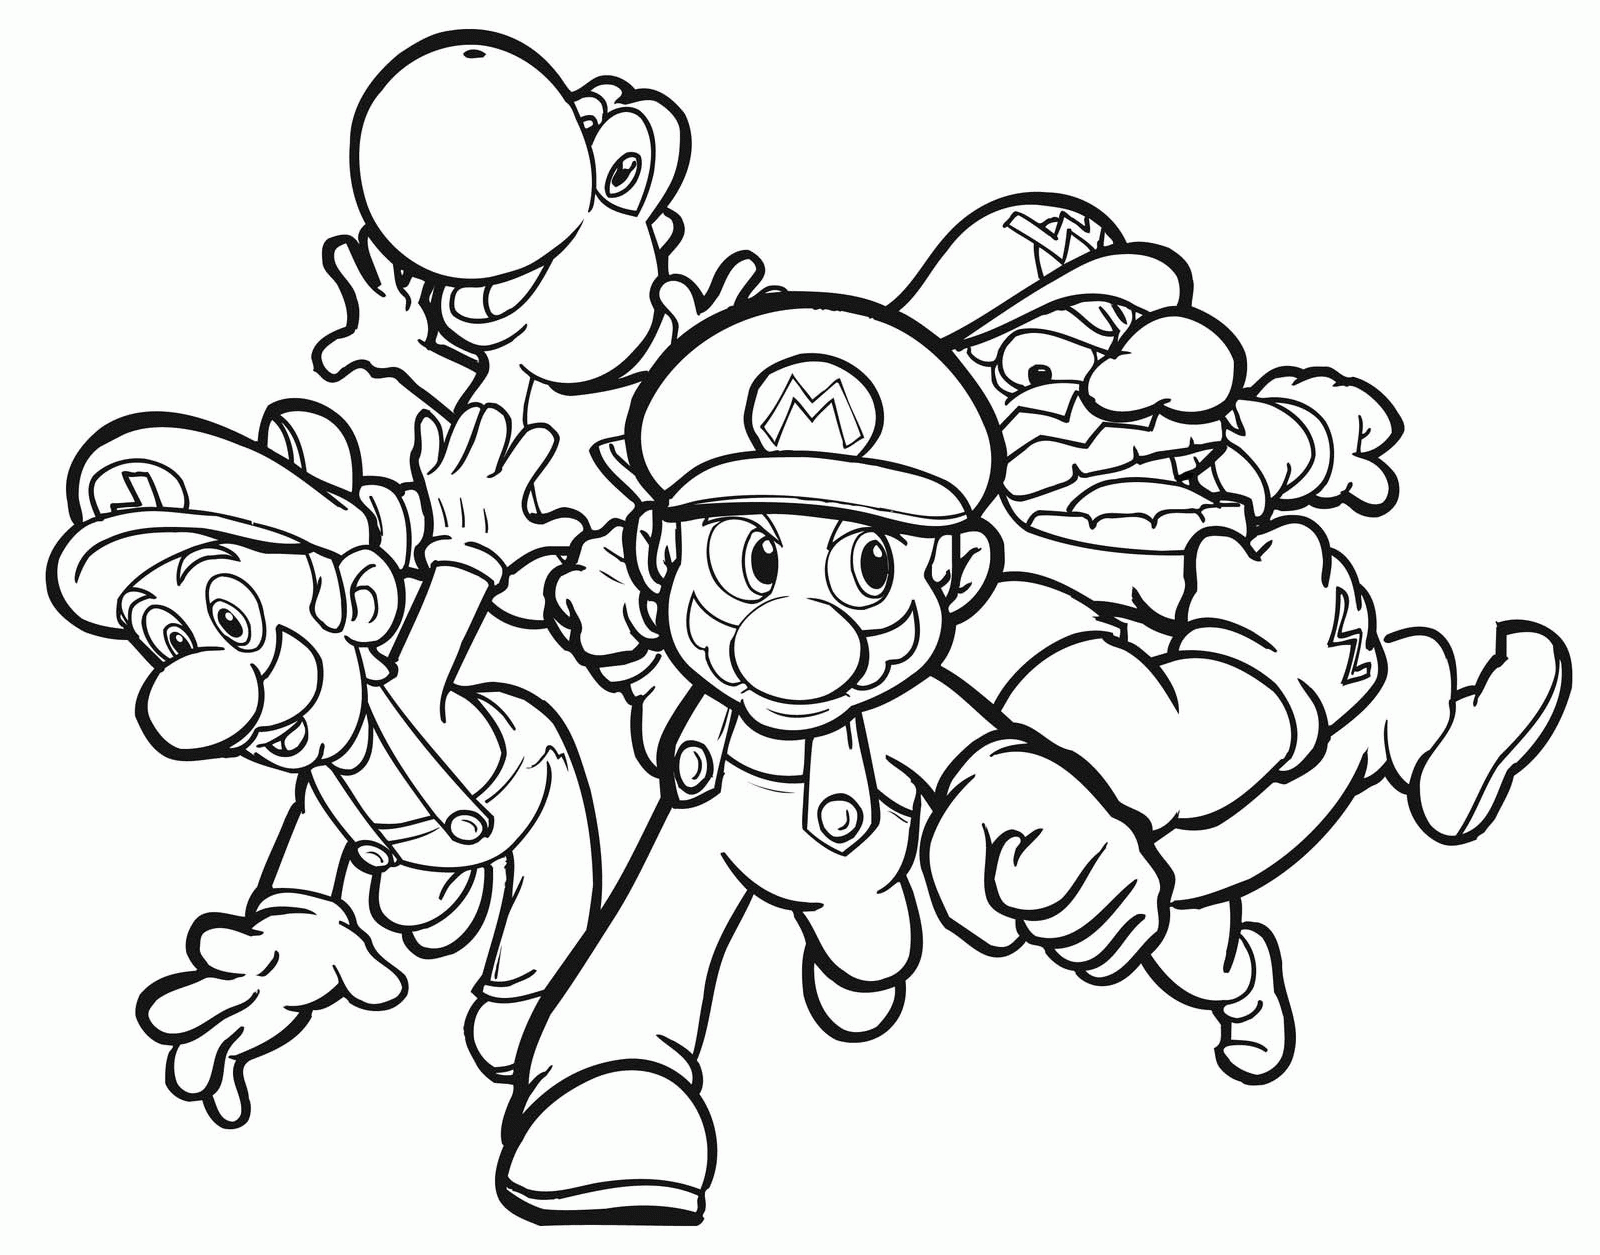 Mario Character Coloring Pages Print - Coloring Home